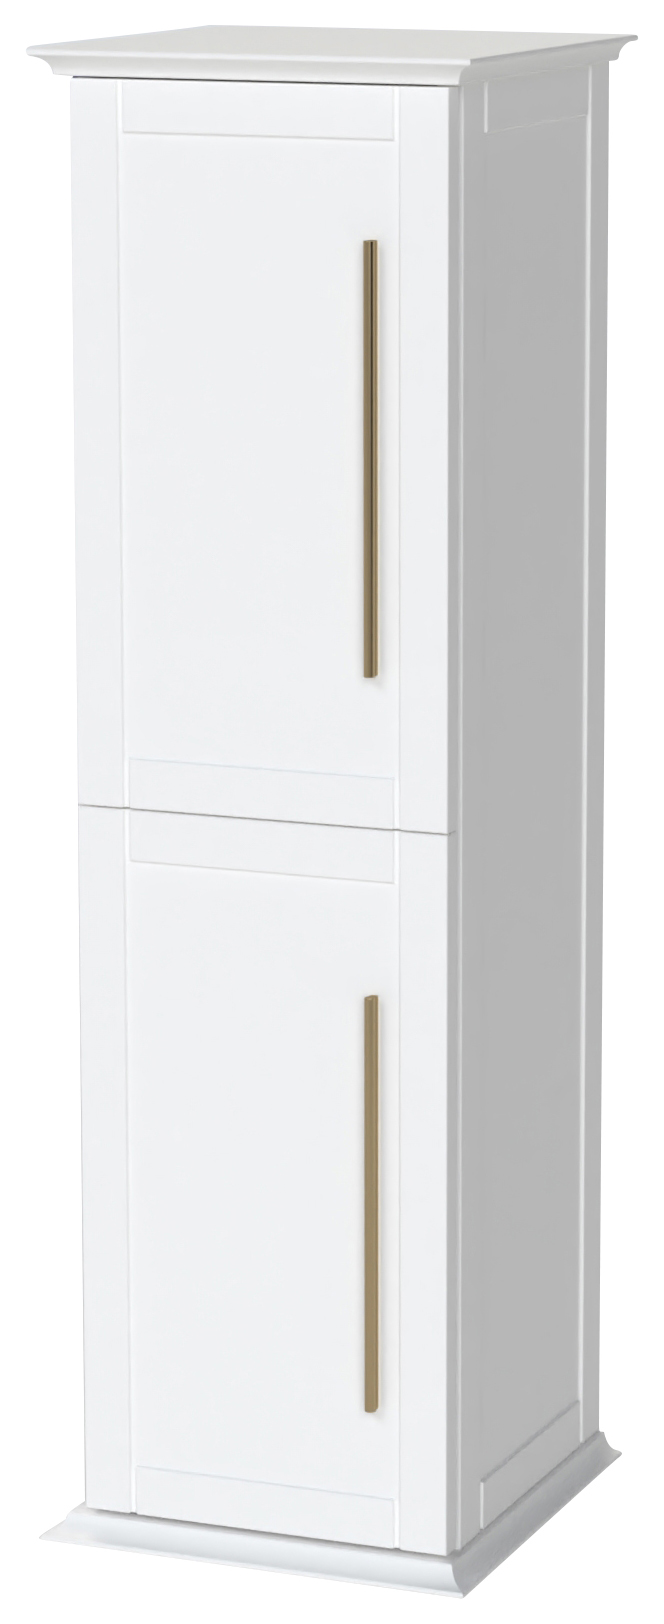 Duarti by Calypso Kentchurch Glacier White Wall Hung Tower with Brass Handles - 340mm